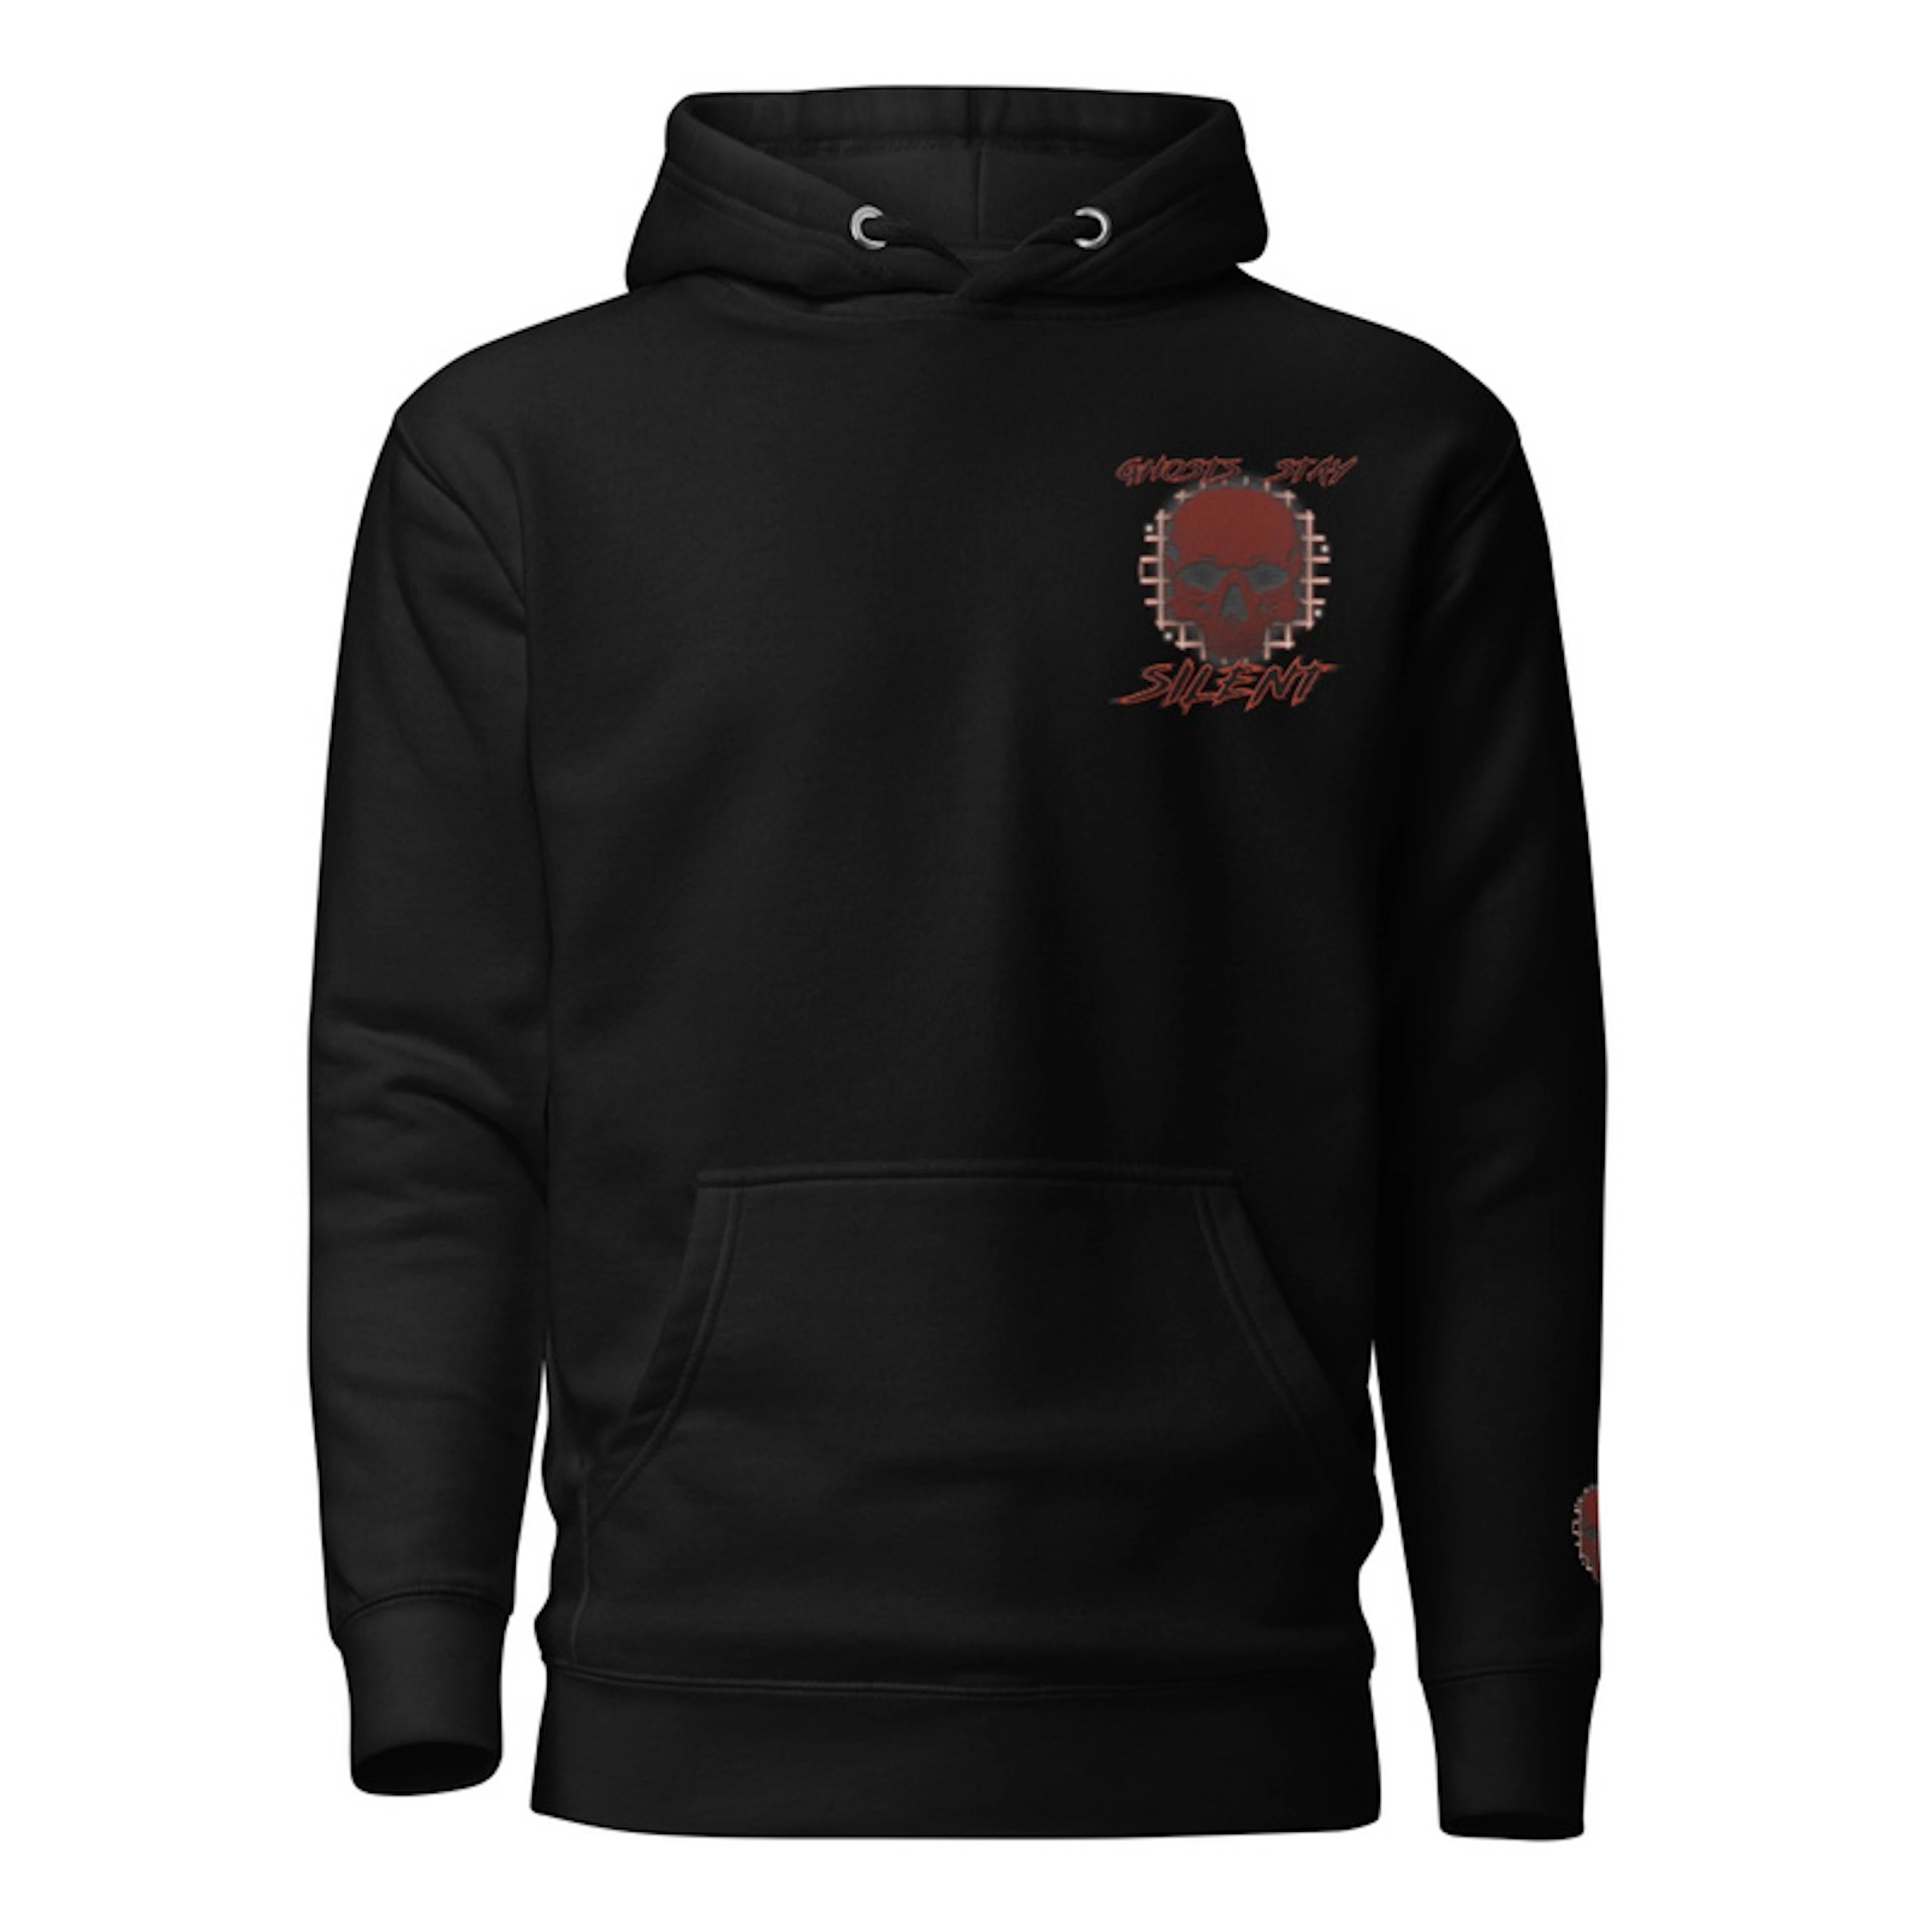 𝗚𝗛𝗢𝗦𝗧𝗦𝗤𝗨𝗔𝗗 Embroidery Hoodie